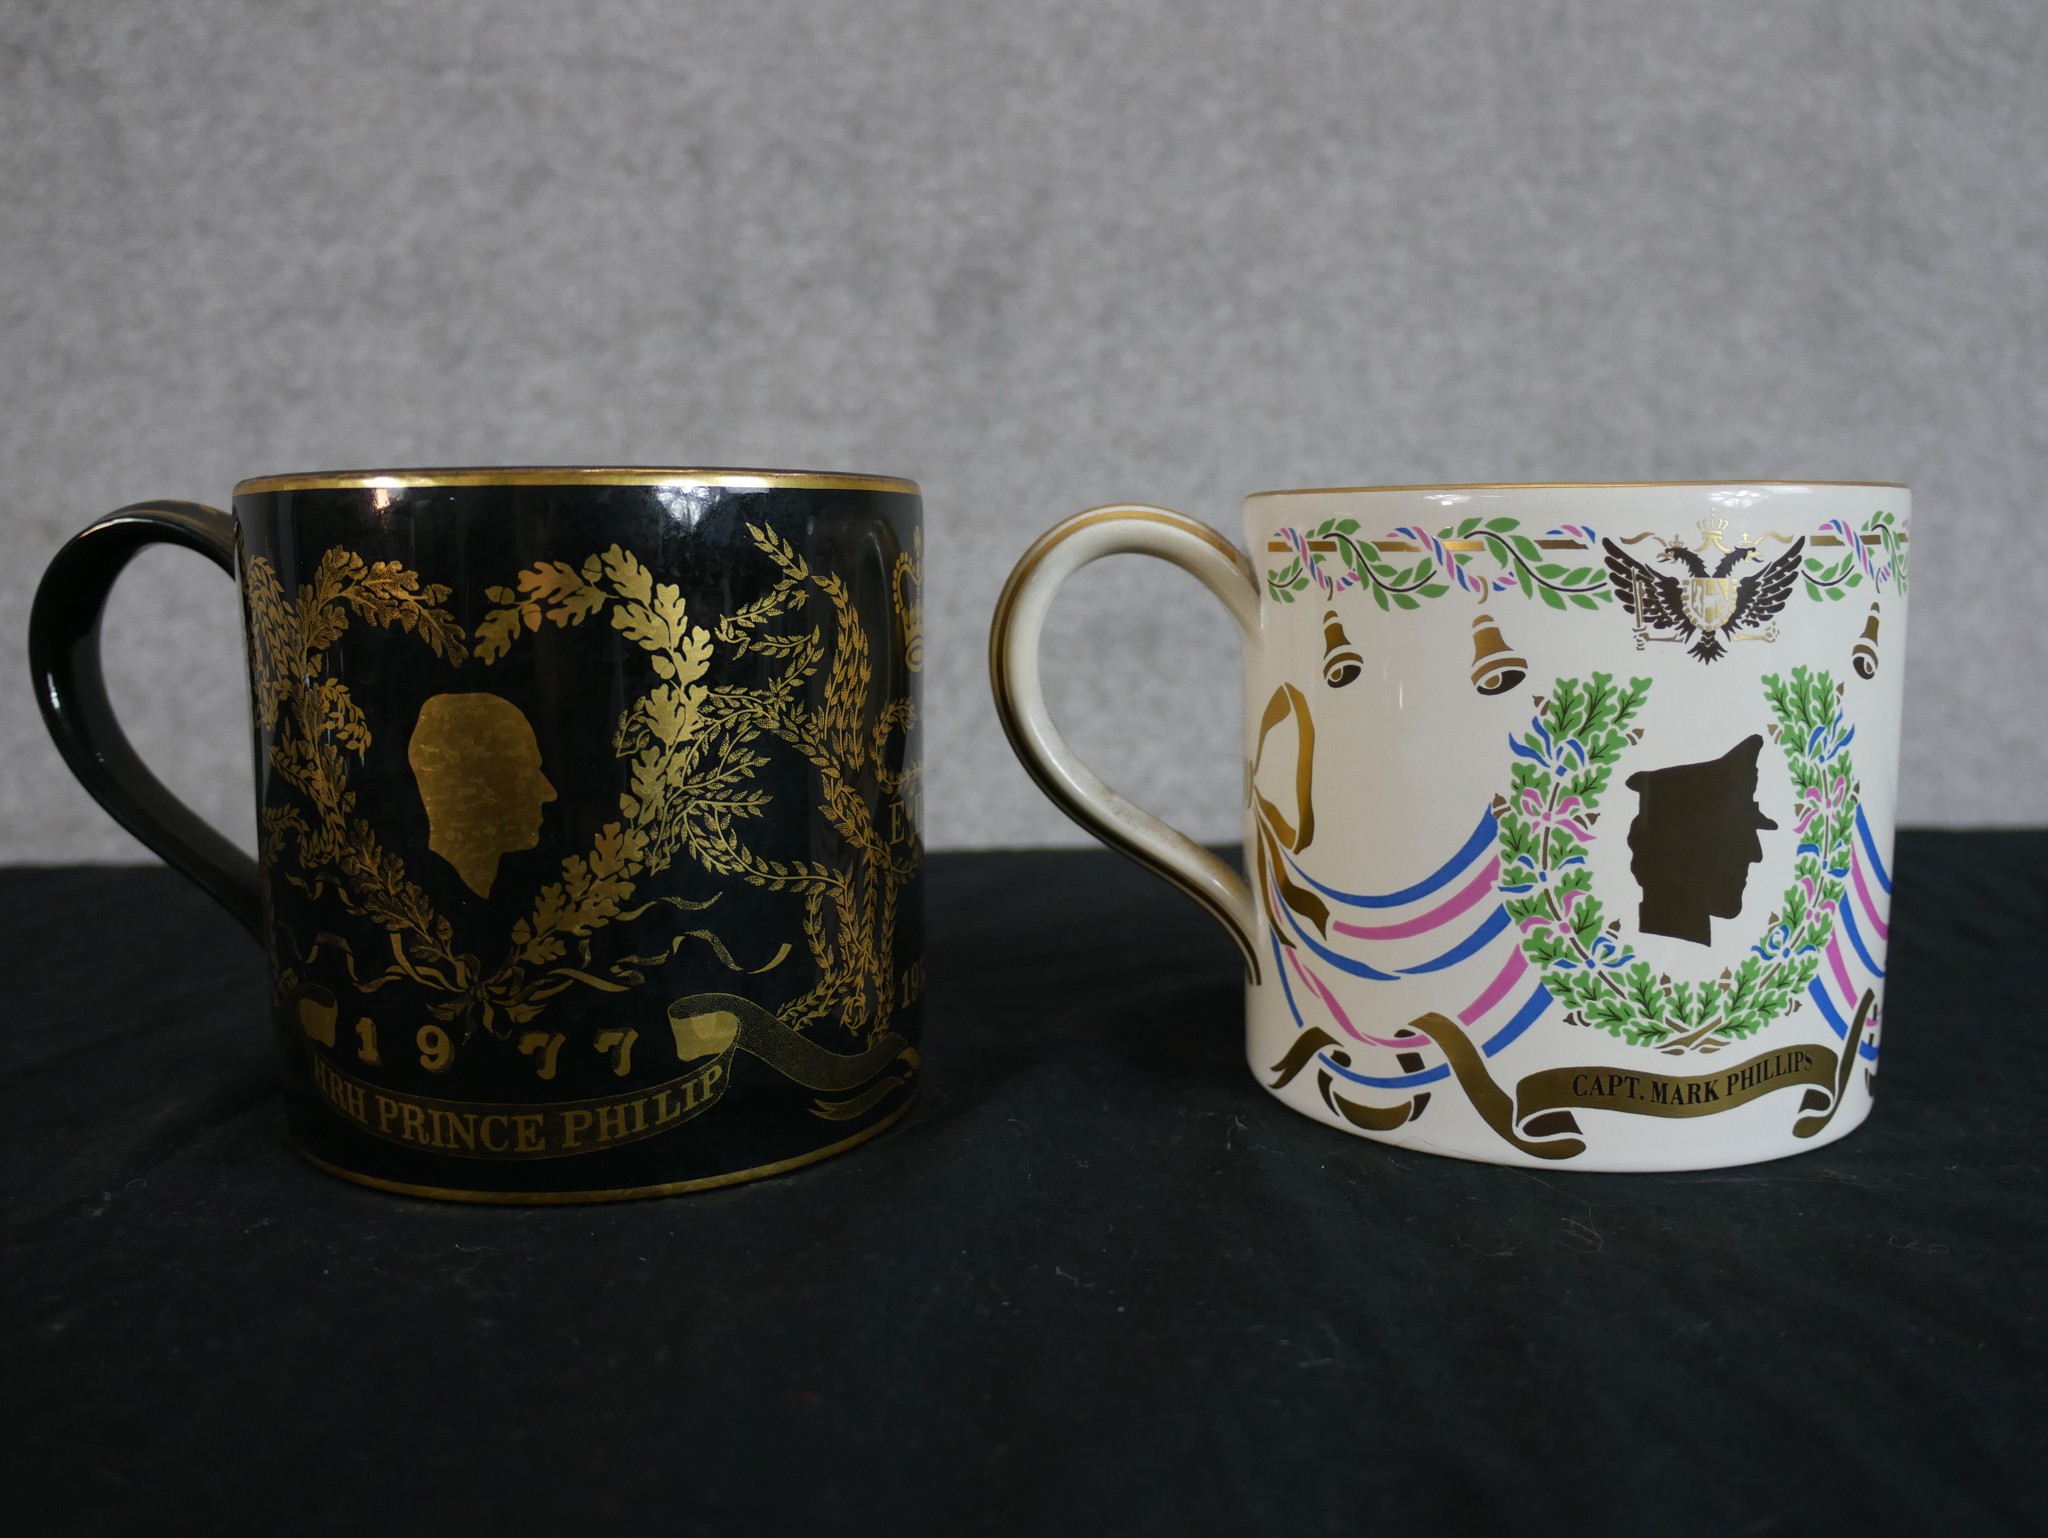 Two limited edition Wedgwood limited edition porcelain tankards designed by Richard Guyatt to - Image 2 of 3